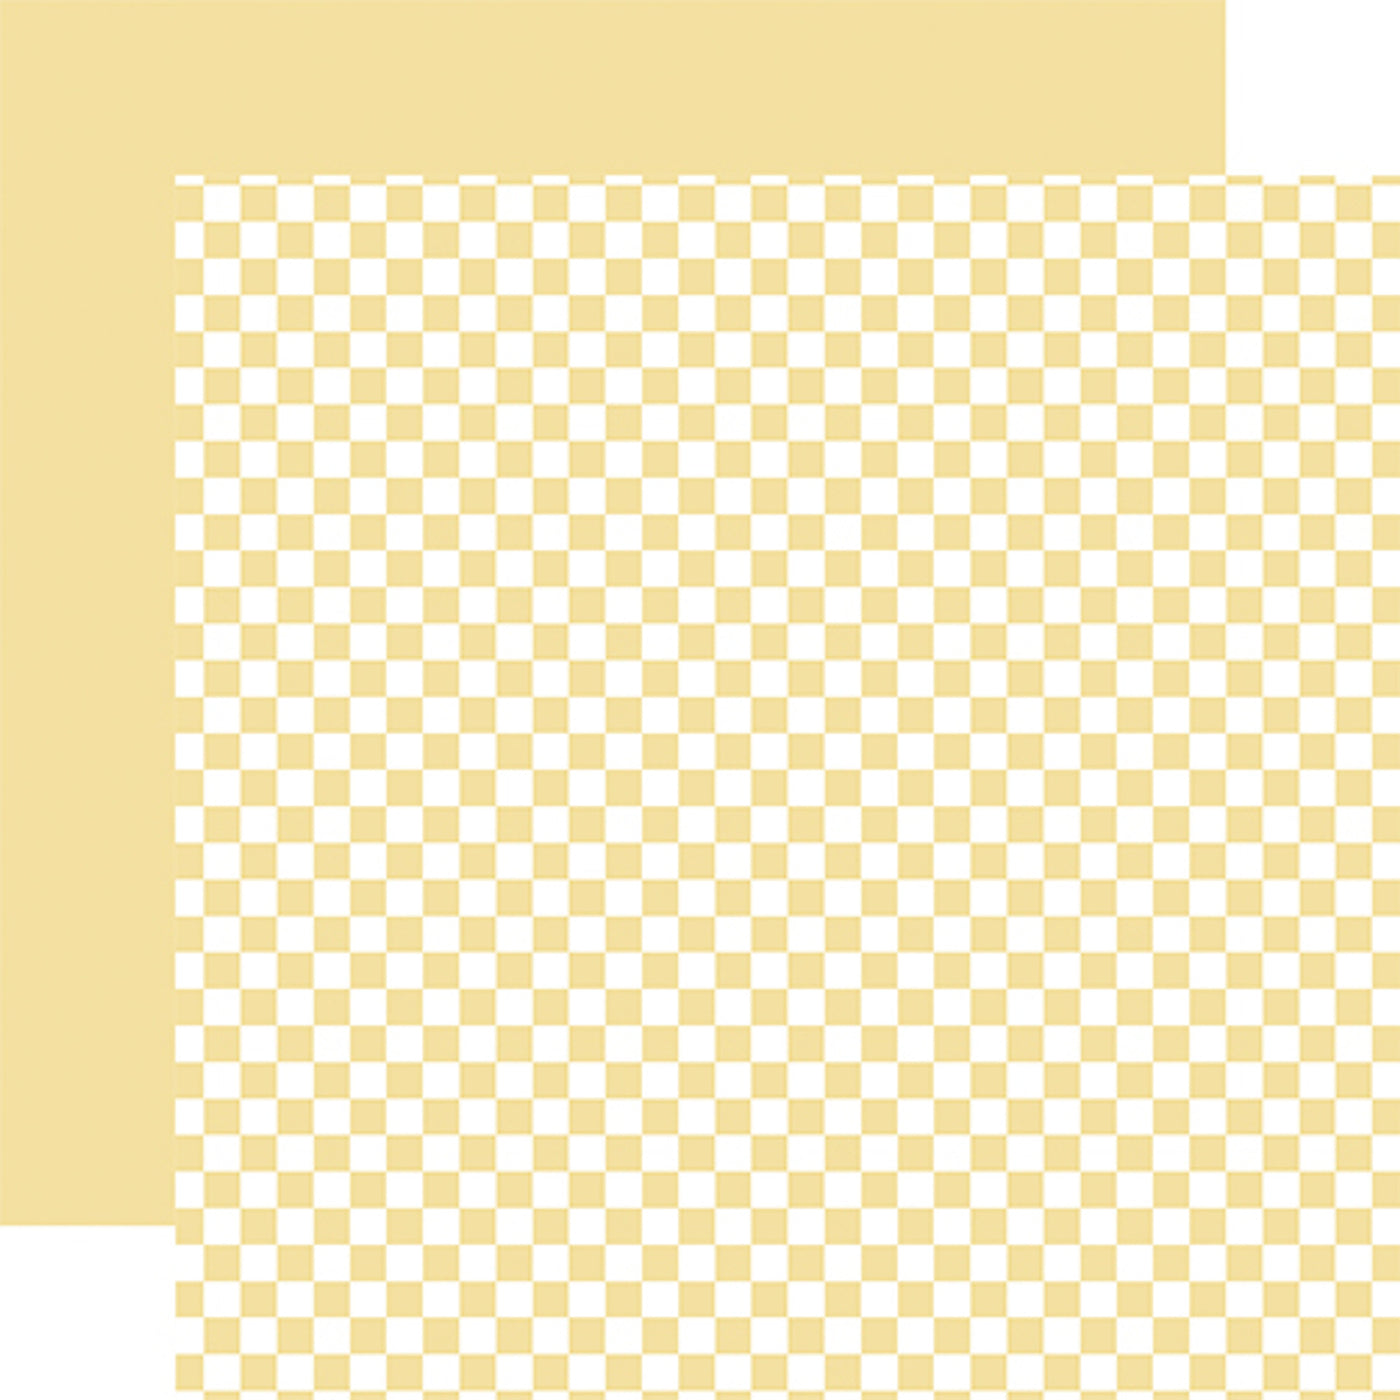 Double-sided 12x12 cardstock sheets - yellow checkered, yellow solid reverse. 65 lb. smooth cardstock. -Echo Park